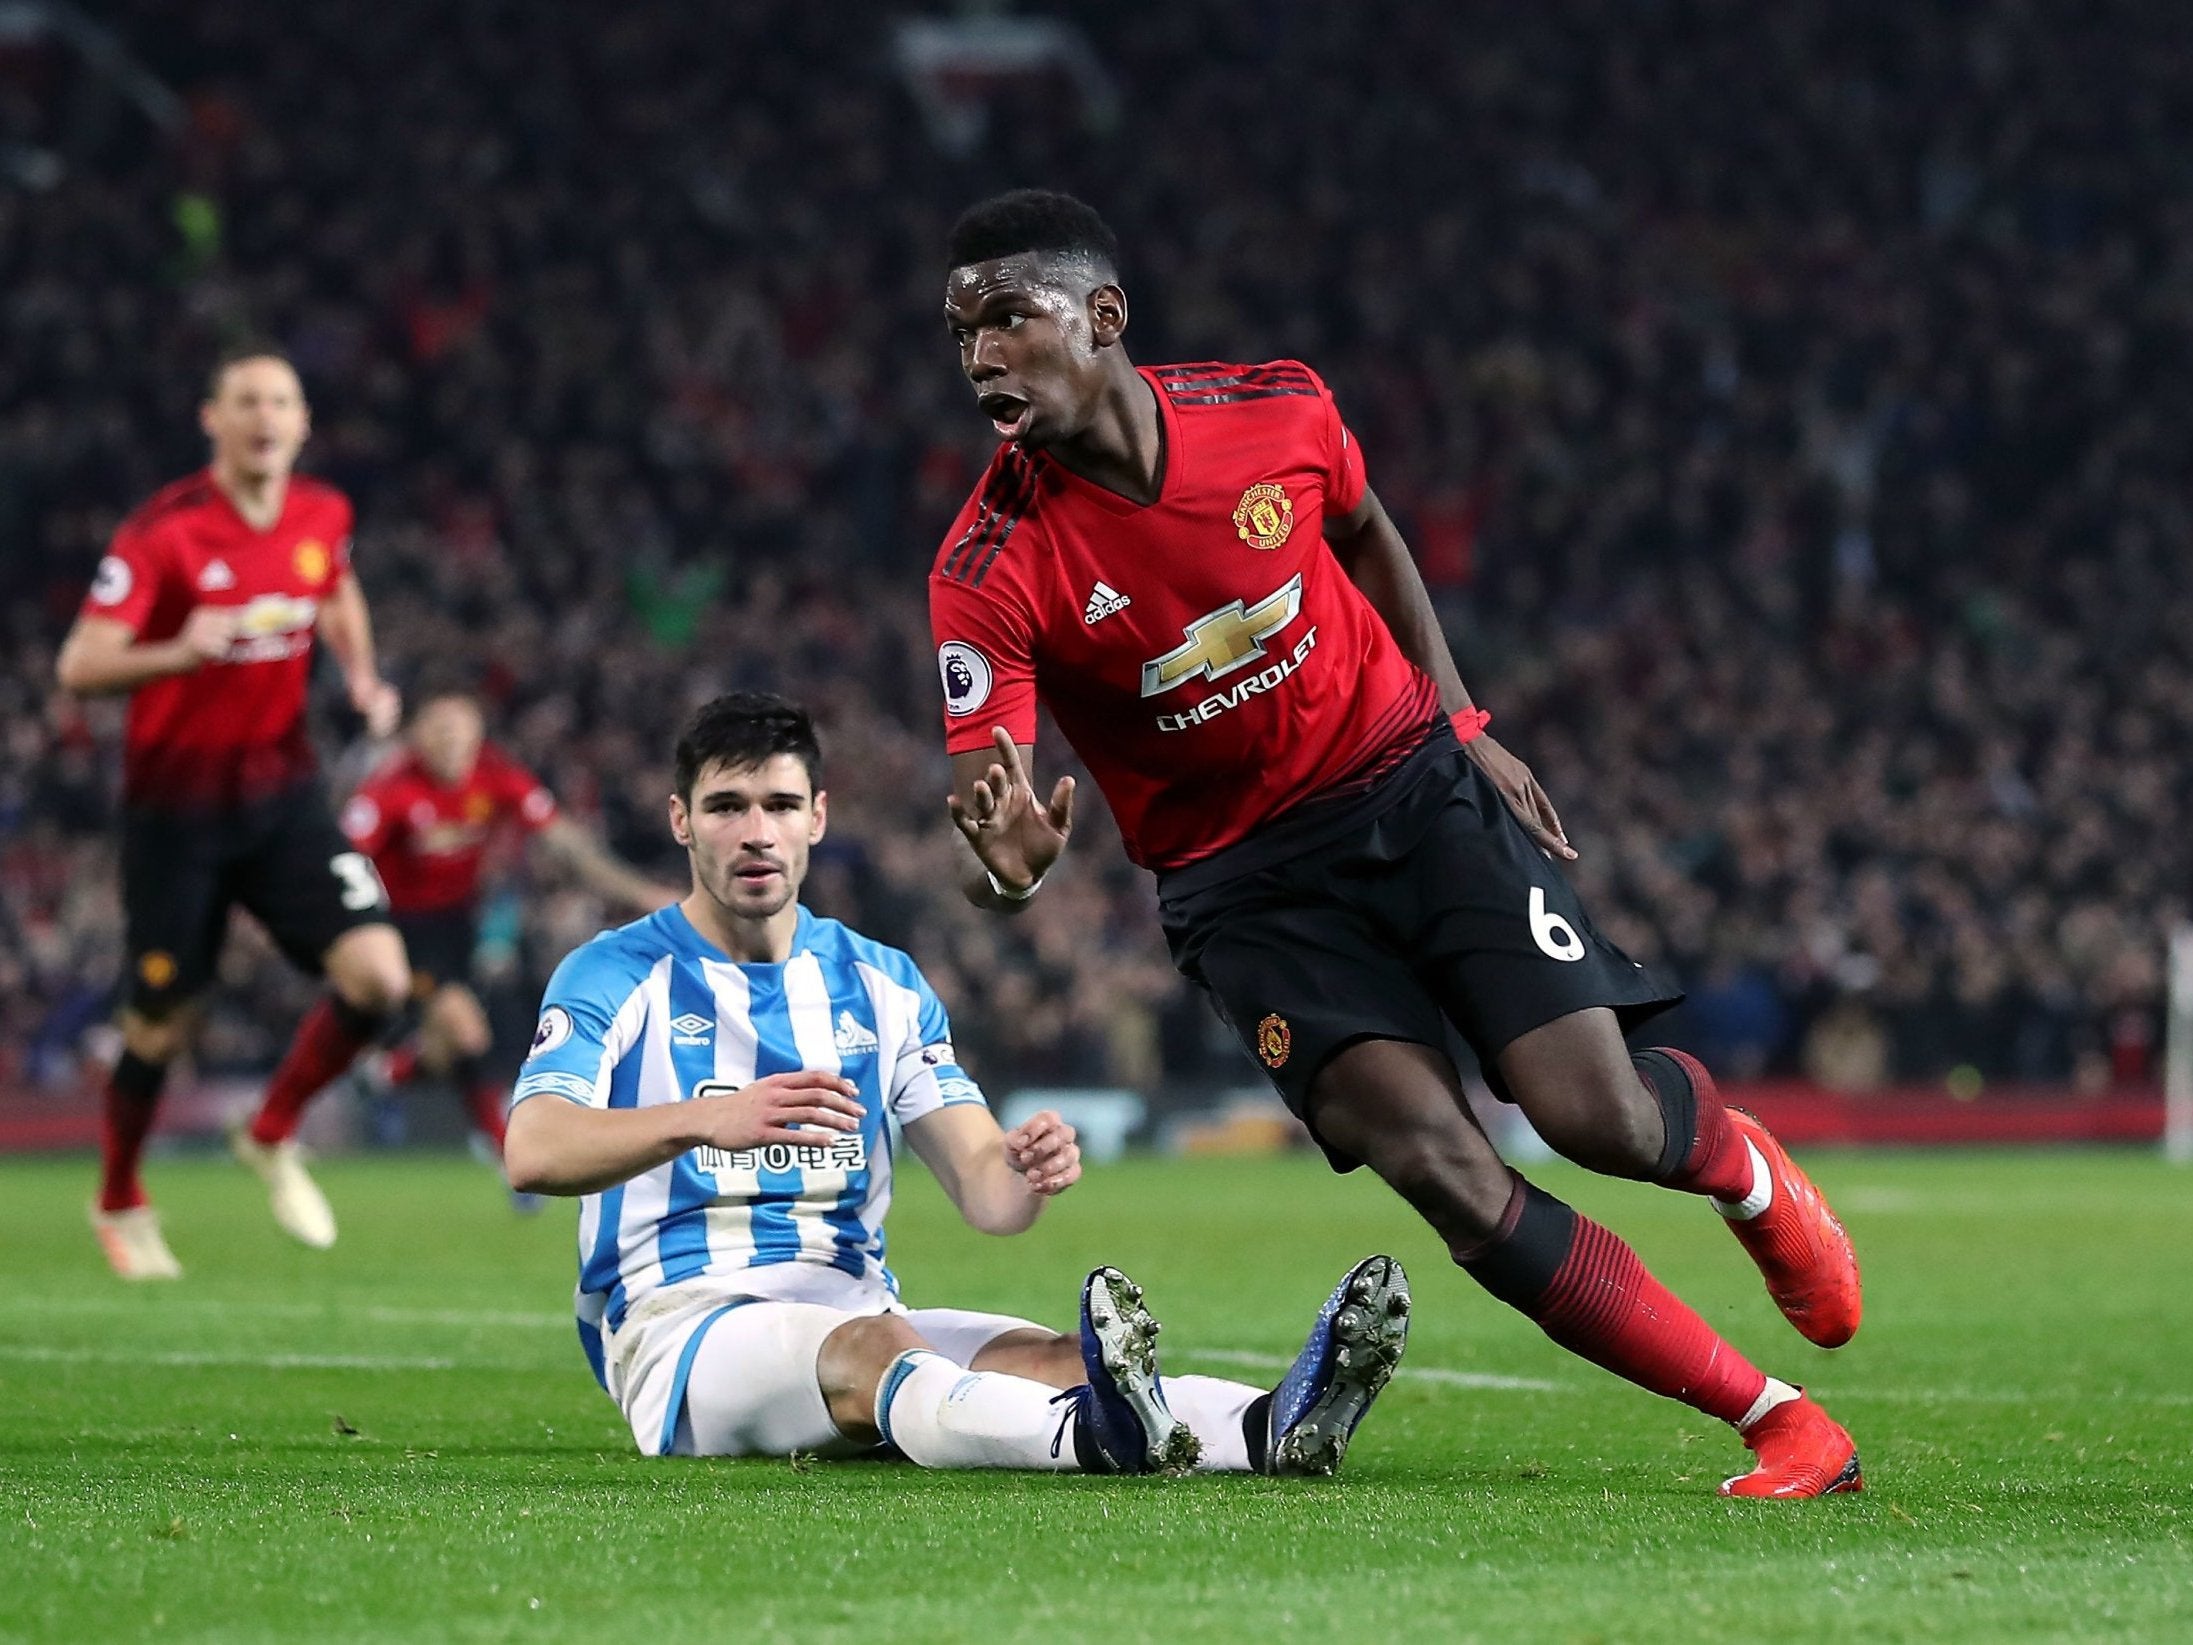 Pogba peels away to celebrate after scoring Manchester United's second goal